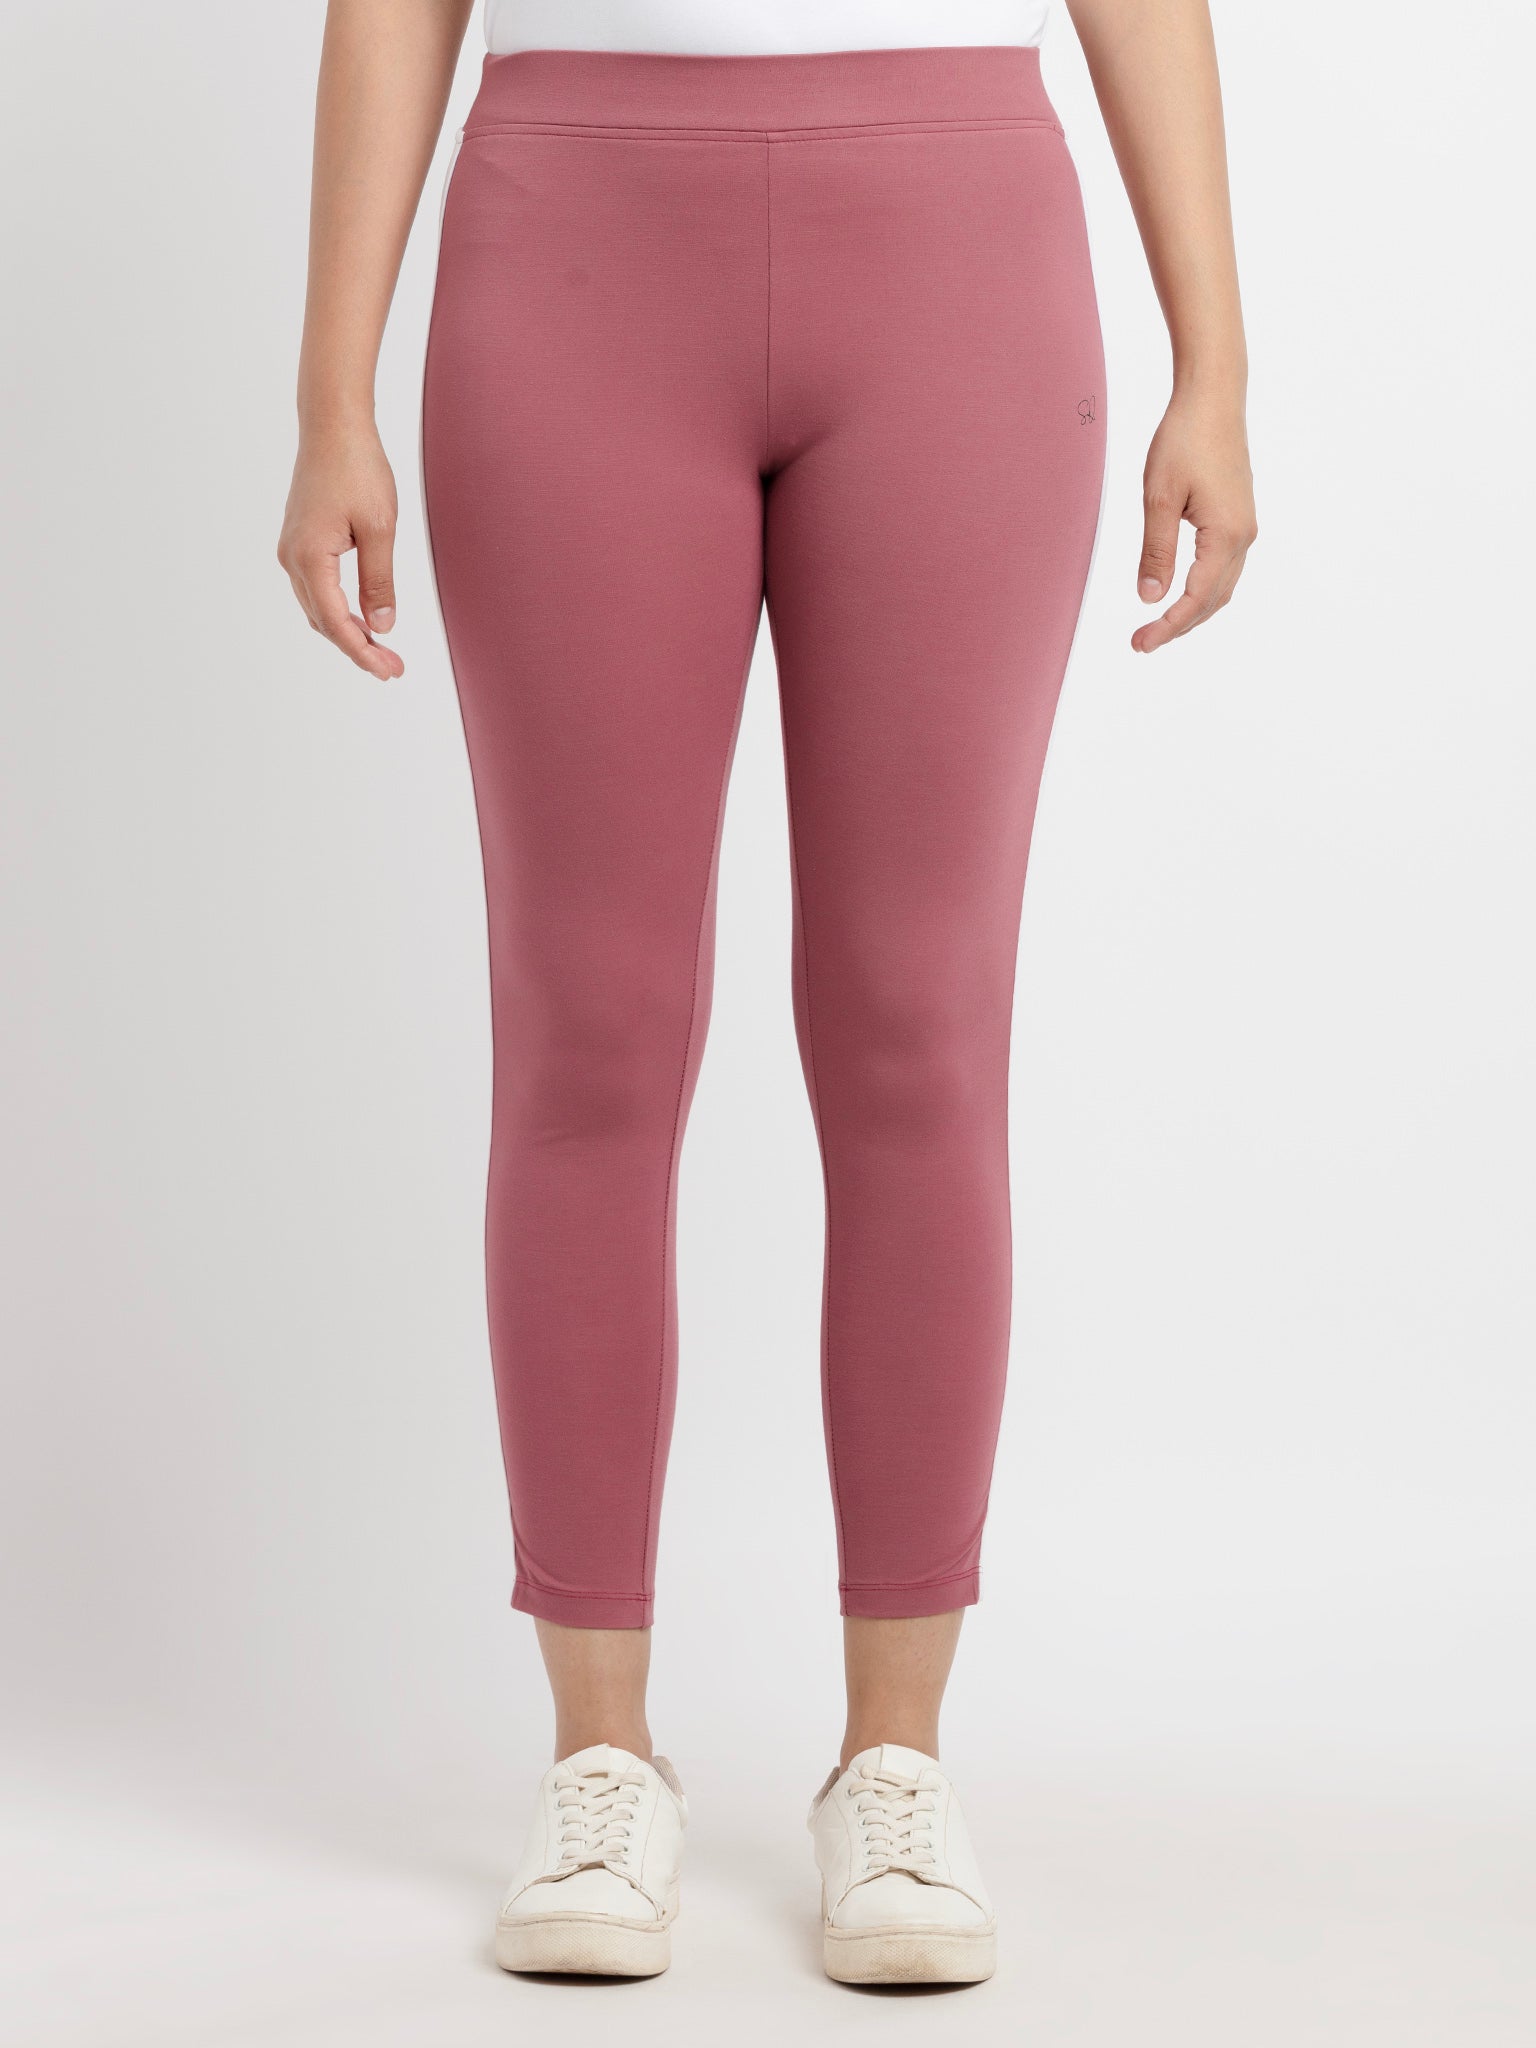 solid jeggings for women